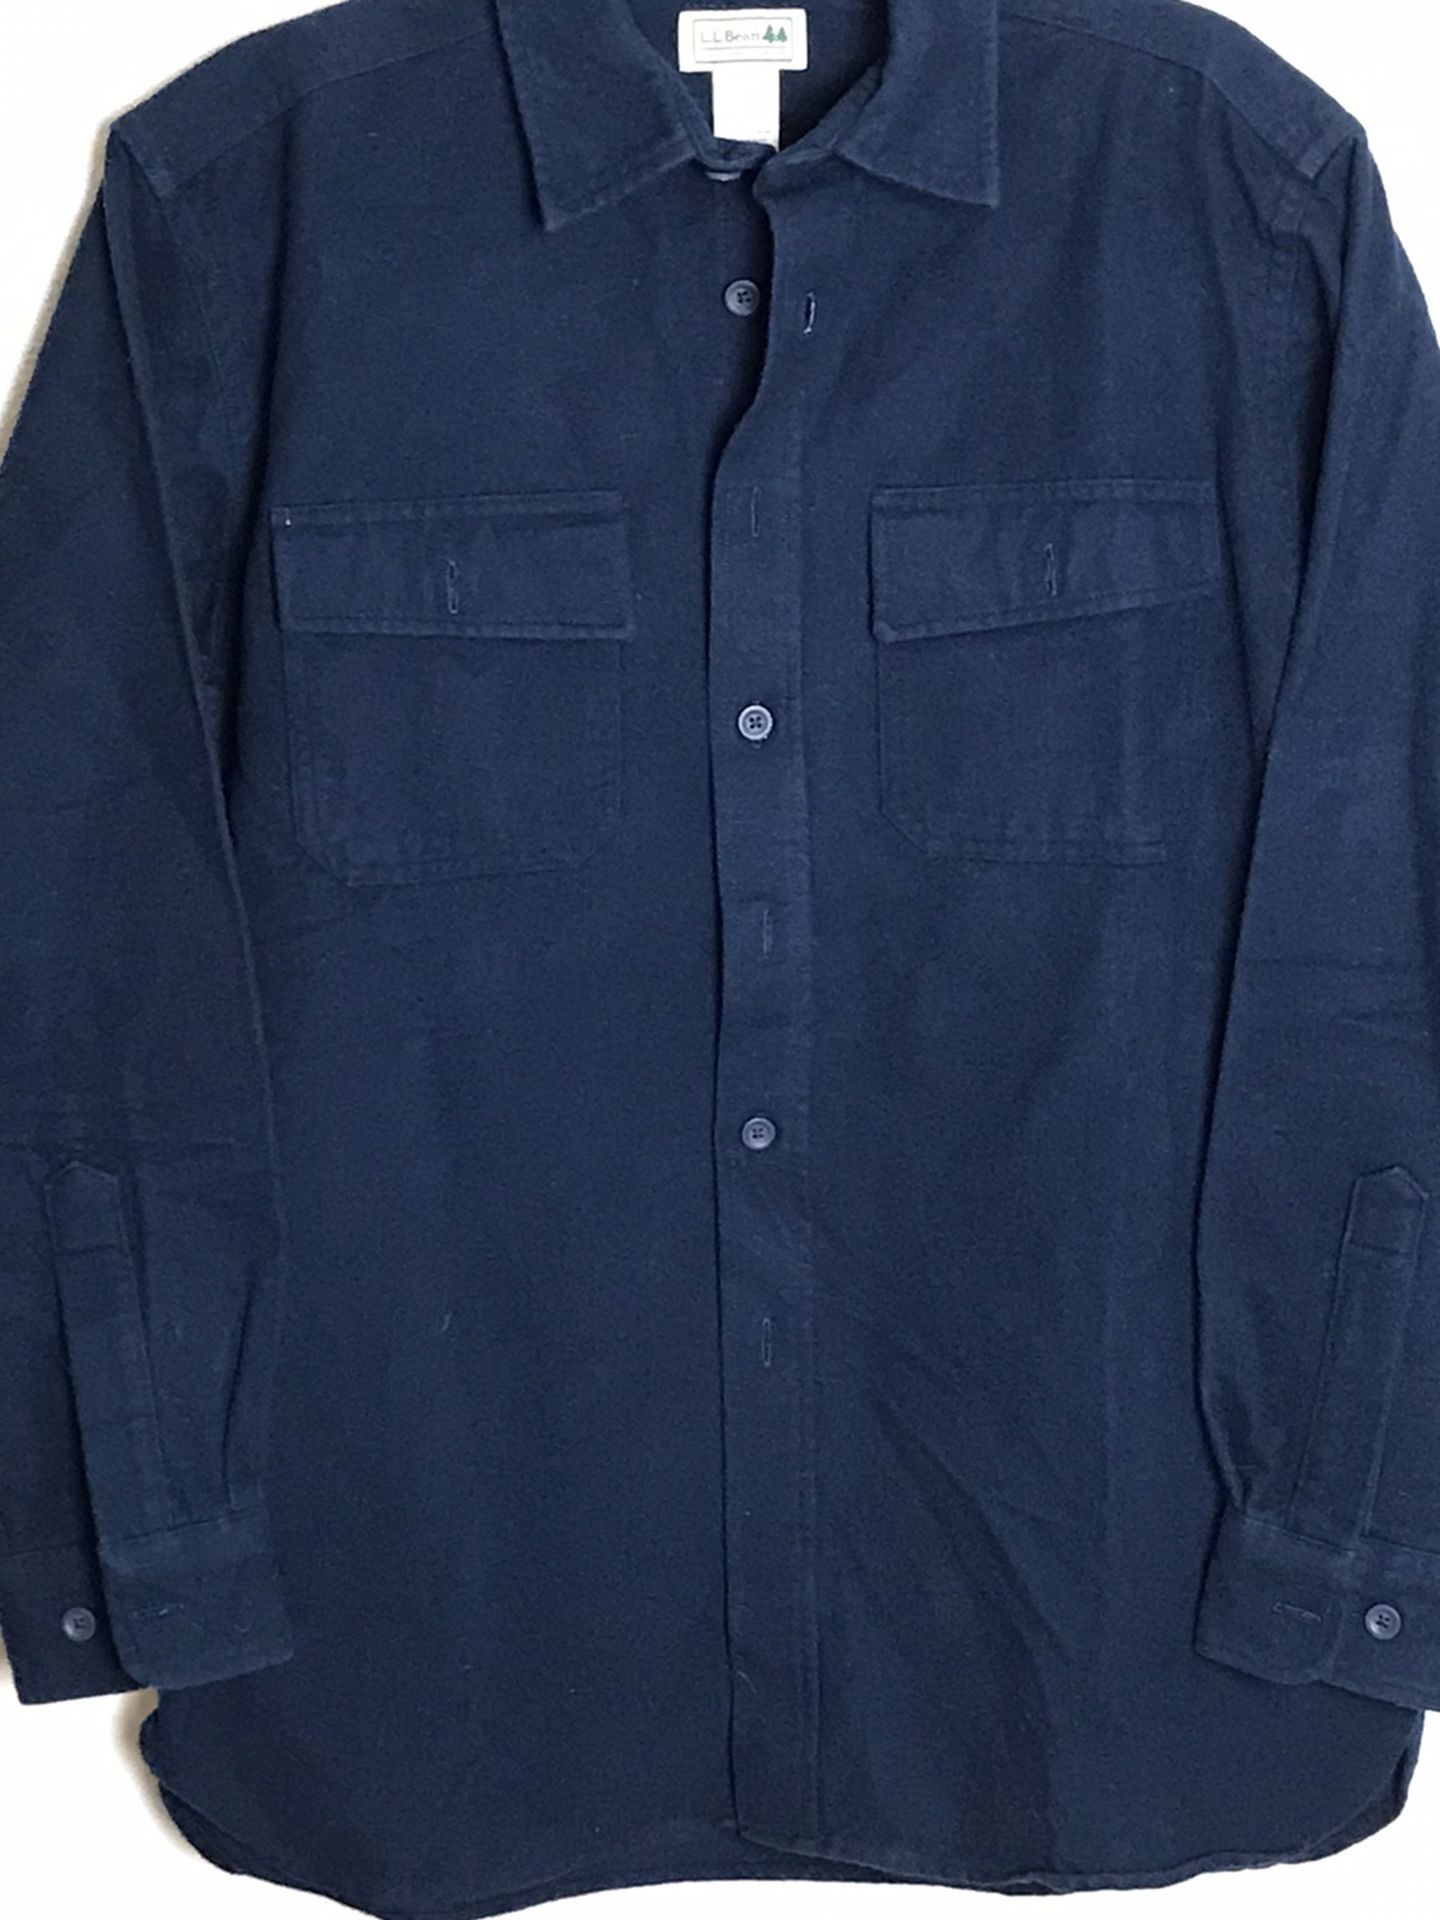 LL Bean Mens Shirt Size M Long Sleeve Chamois Flannel Navy Blue Button Up 0MT03 Gently used